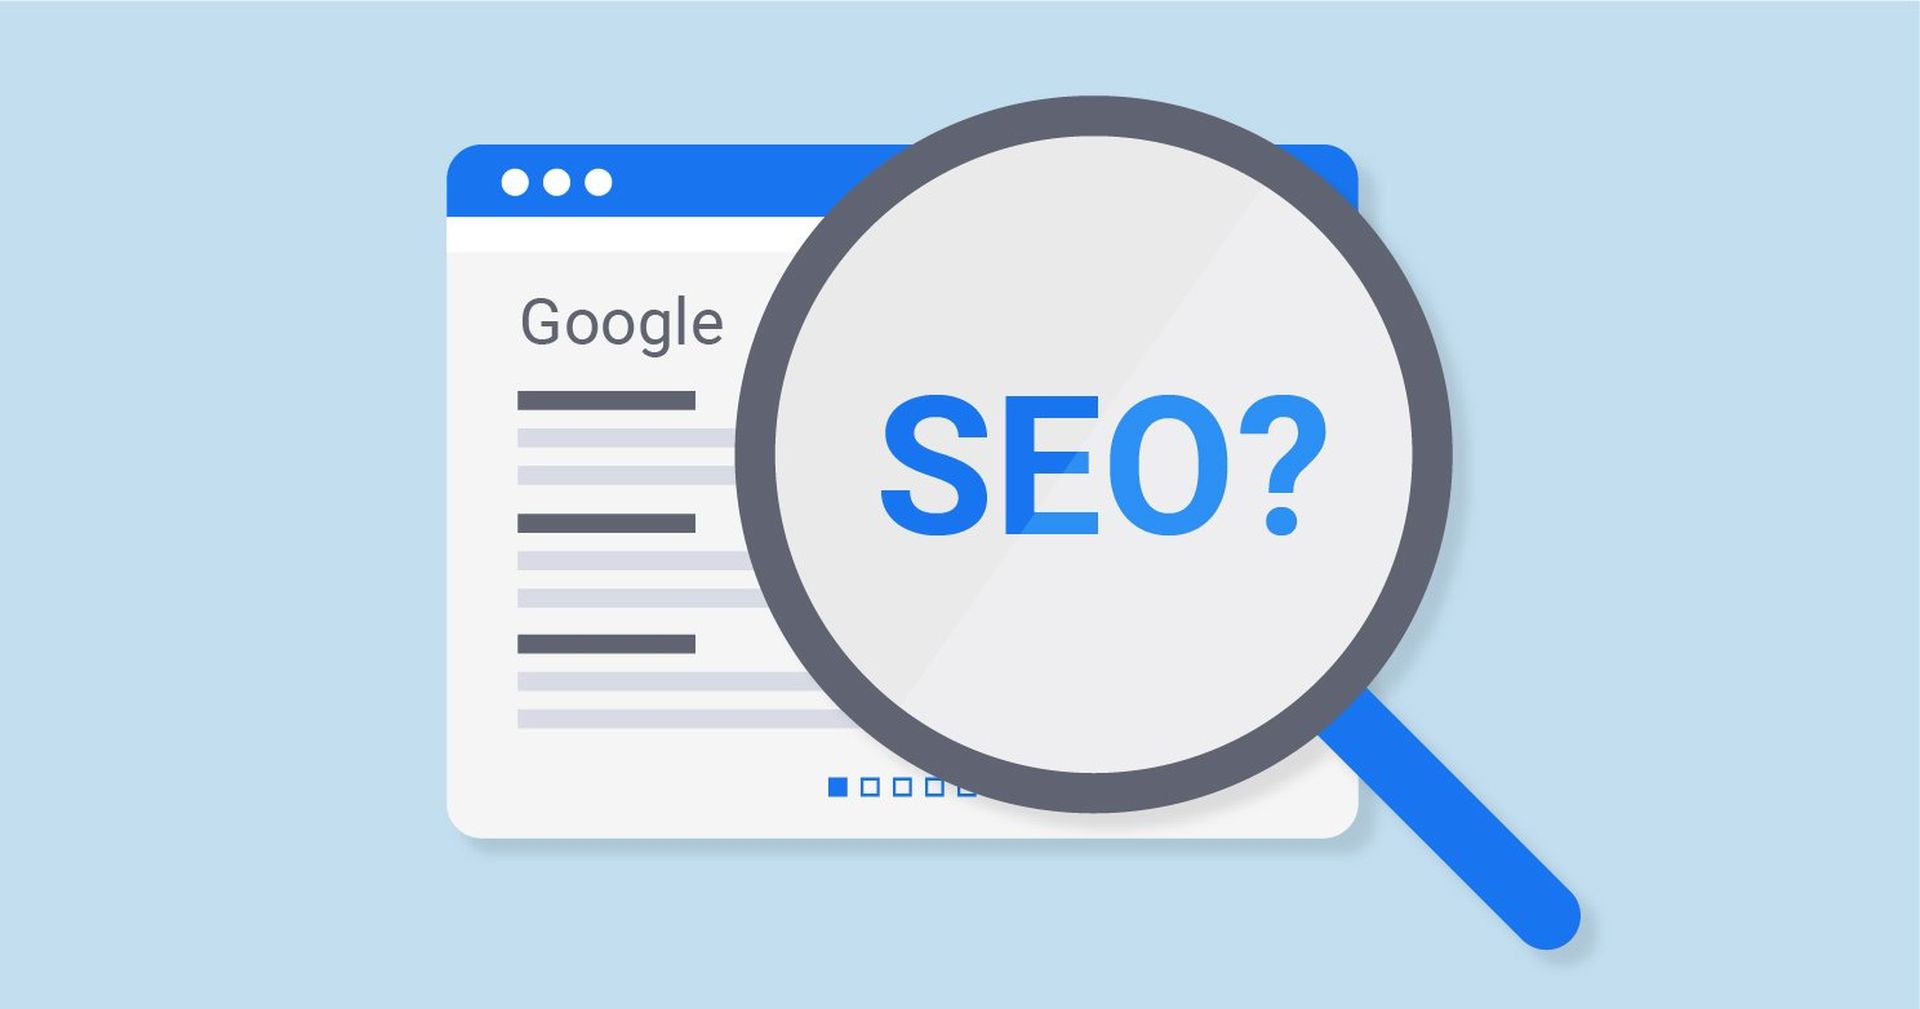 While many know what is search engine optimization, most don't know SEO job salary and what factors affect it. That is why we'll go over all you need to know...